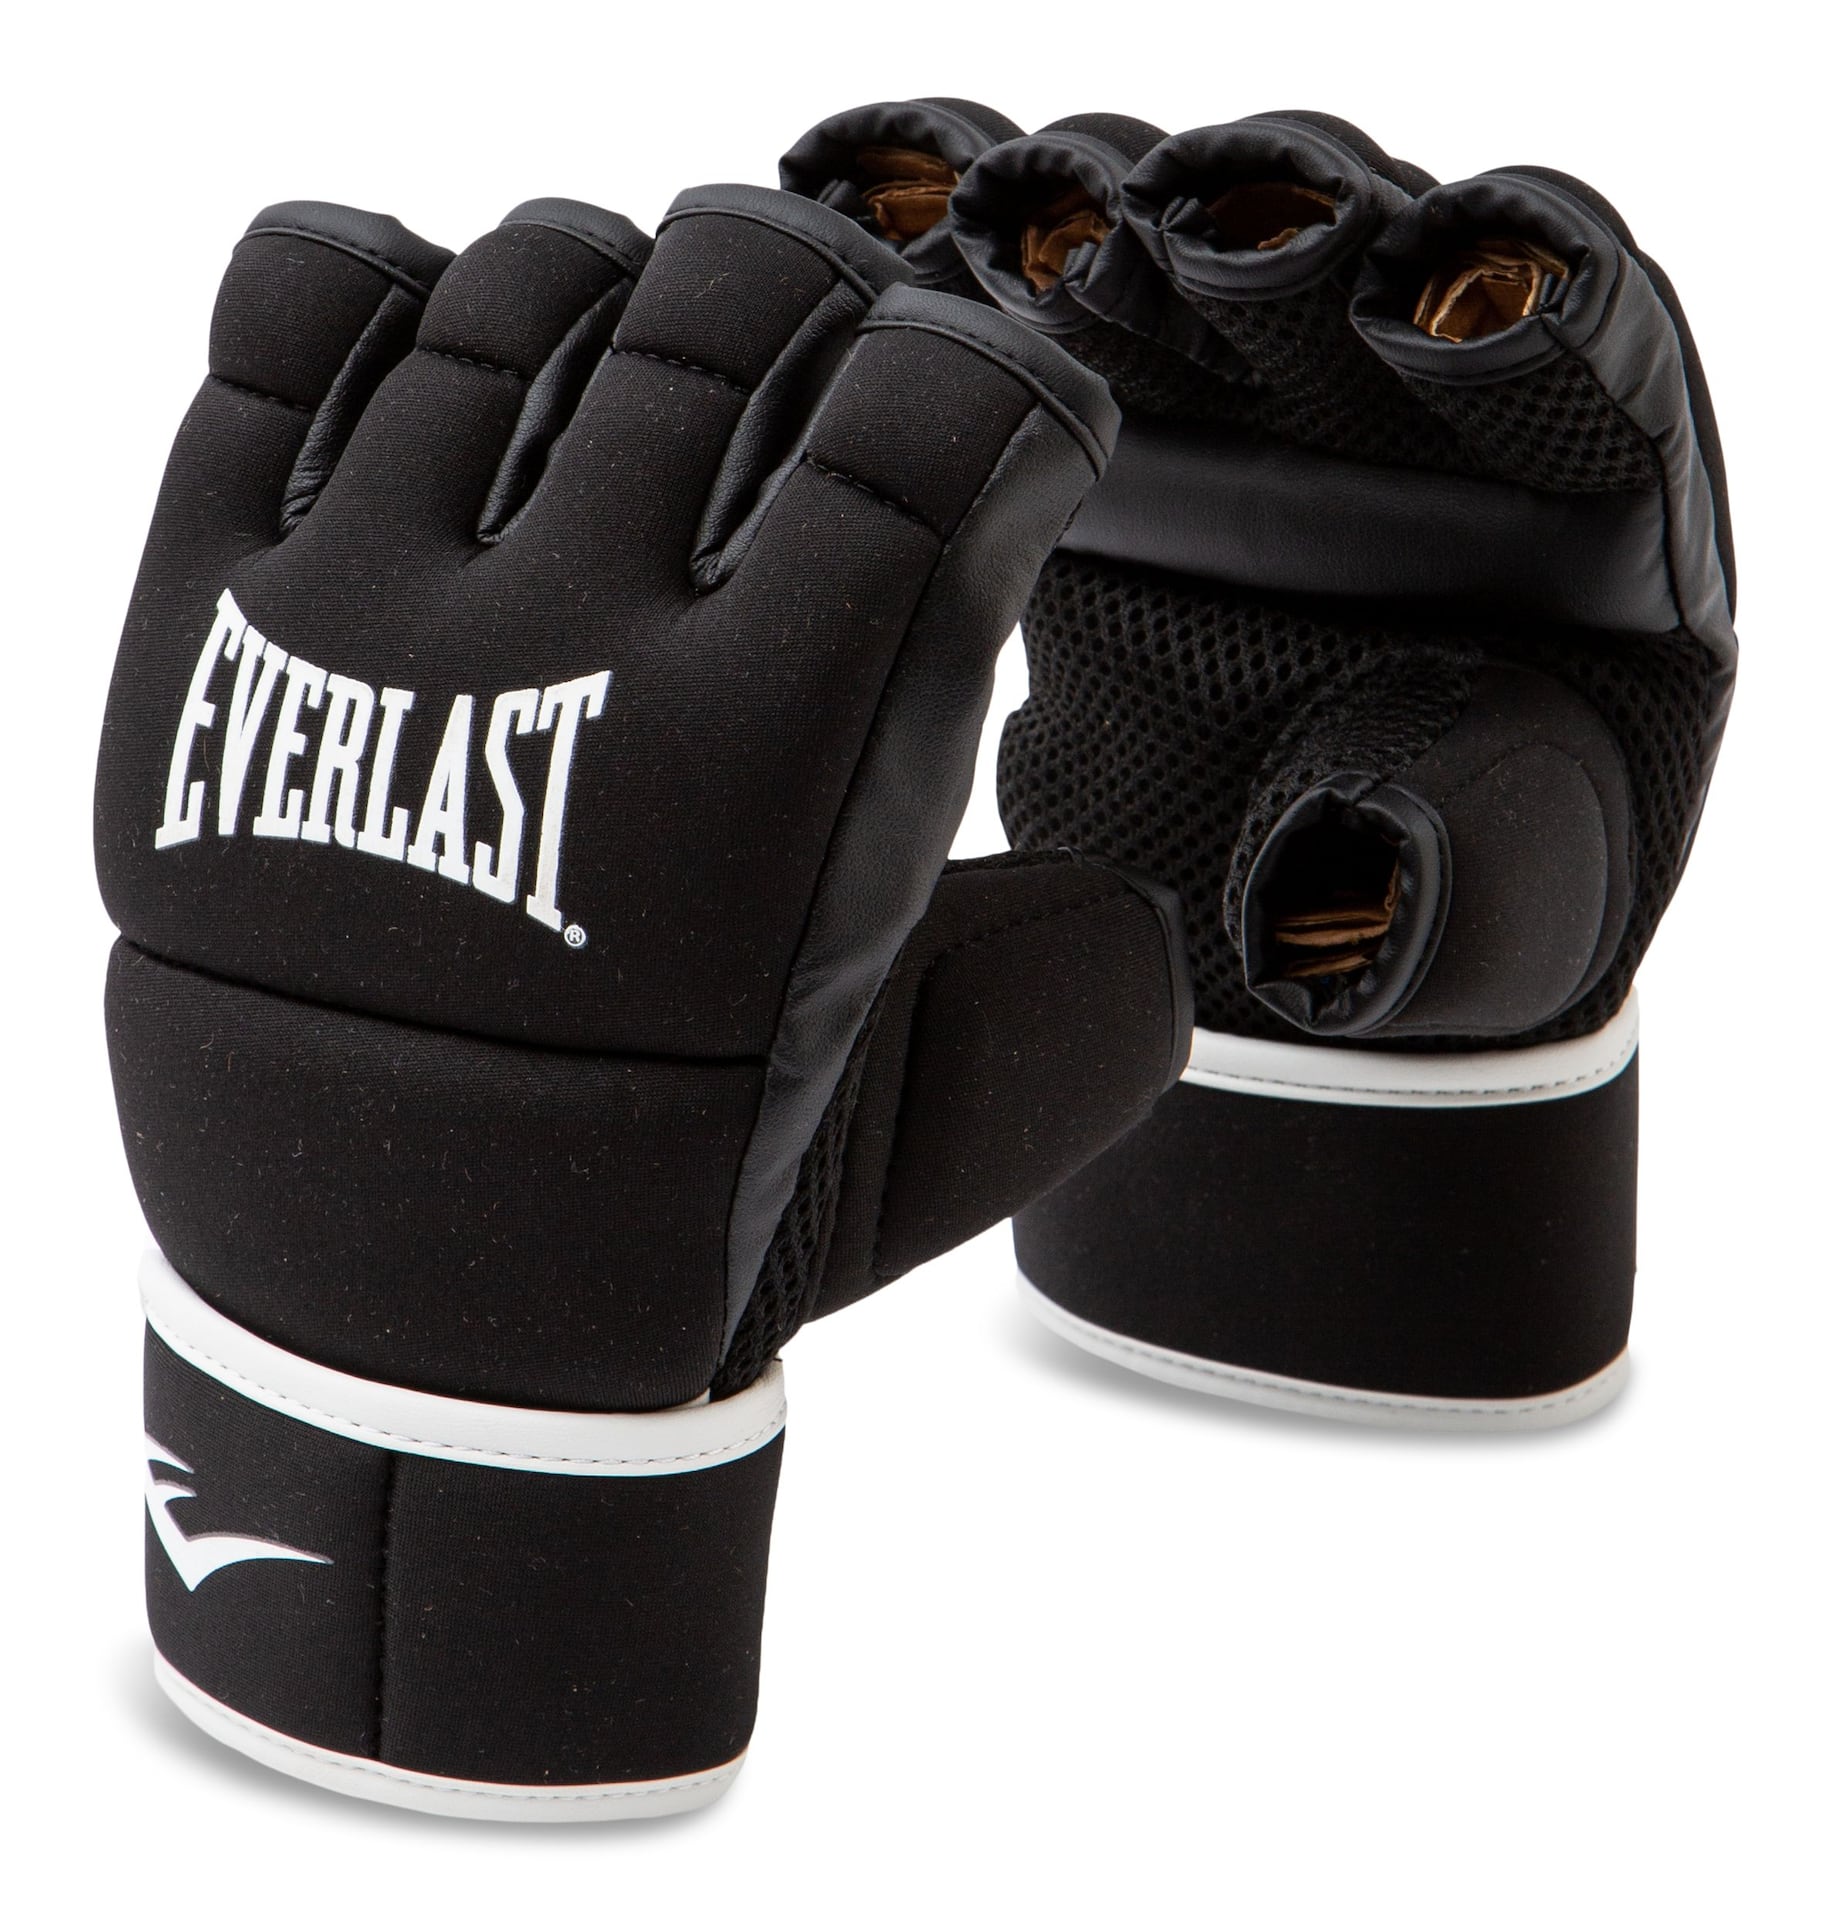 Everlast Core Kickboxing Gloves, Black, More Options Available